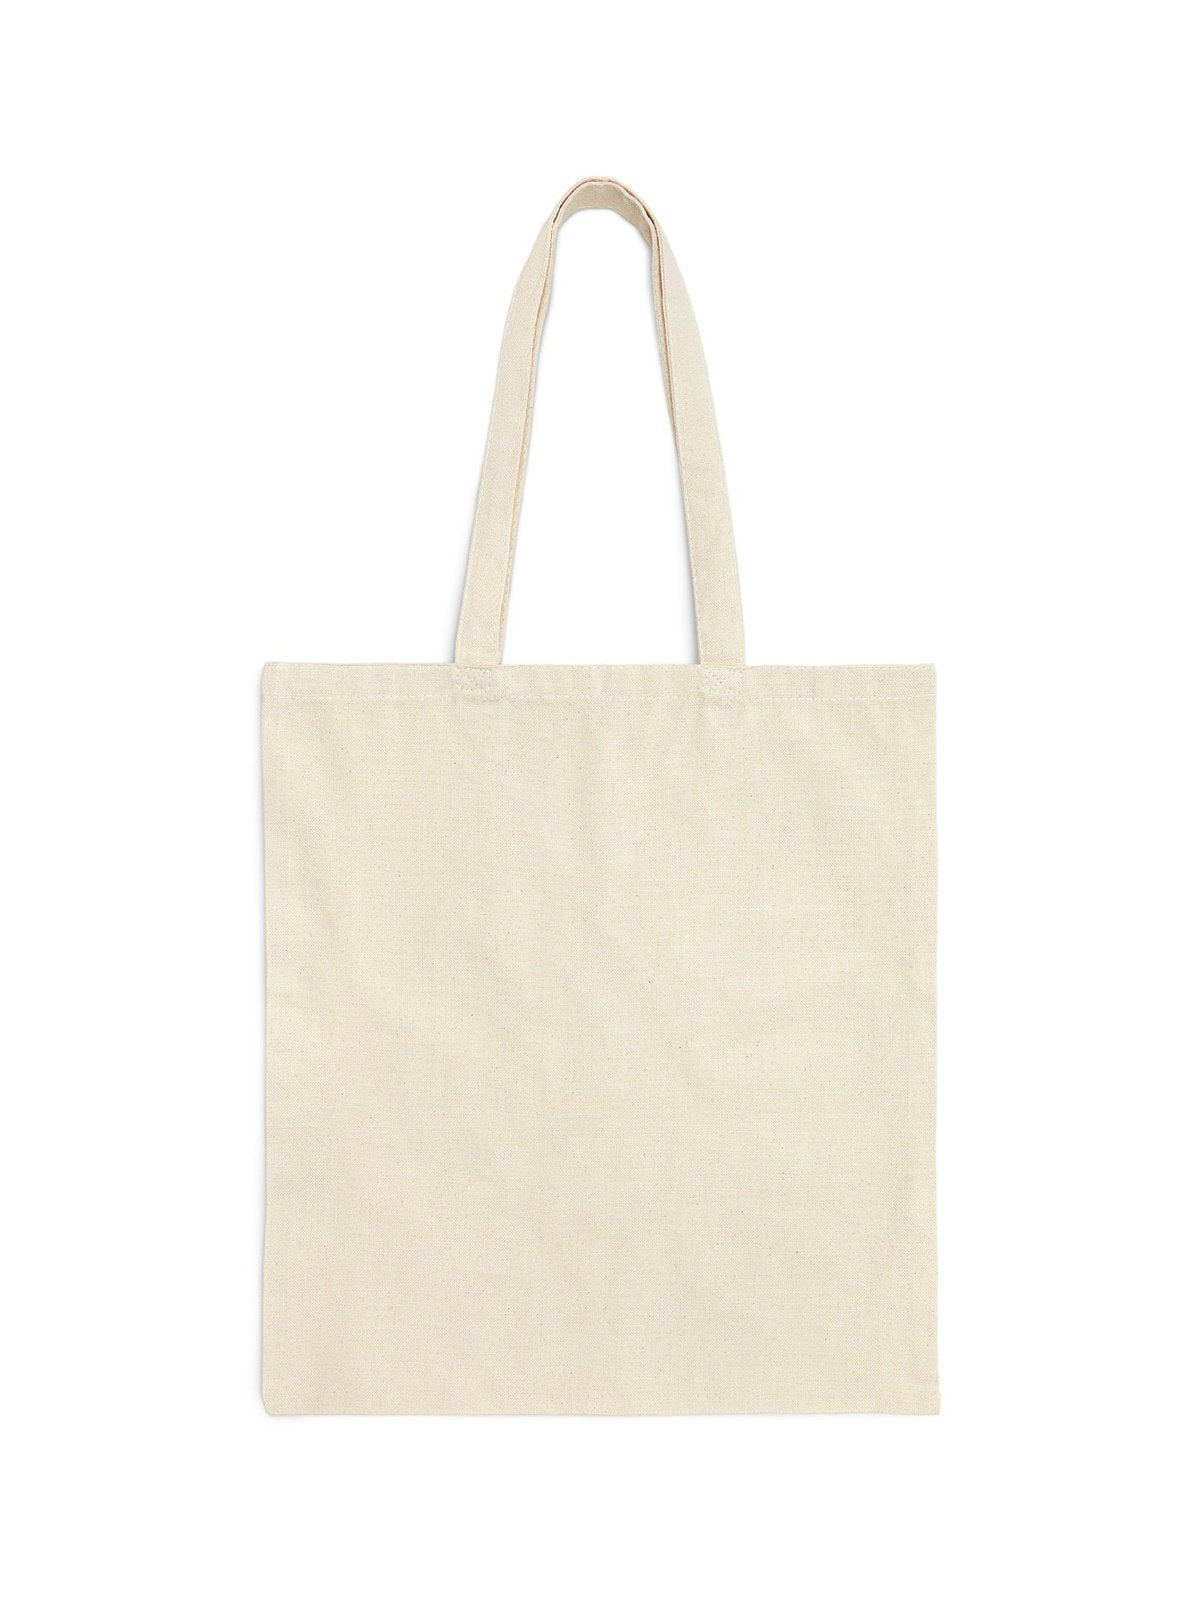 Black and Beautiful Cotton Canvas Tote Bag